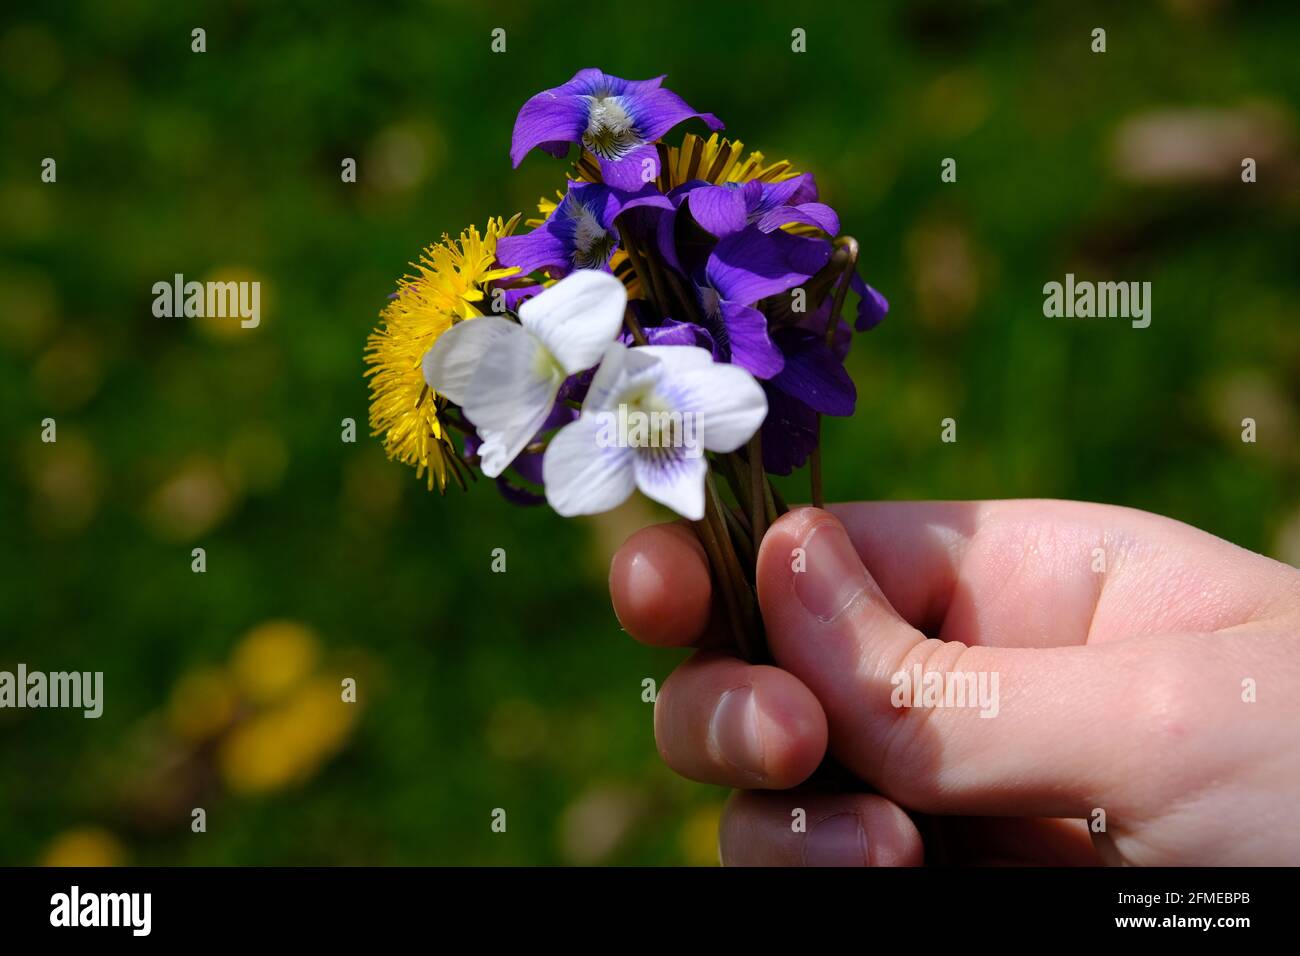 A young hand holds a small bunch of picked spring flowers - dandelion, white and purple violets. Against a grass background. Stock Photo